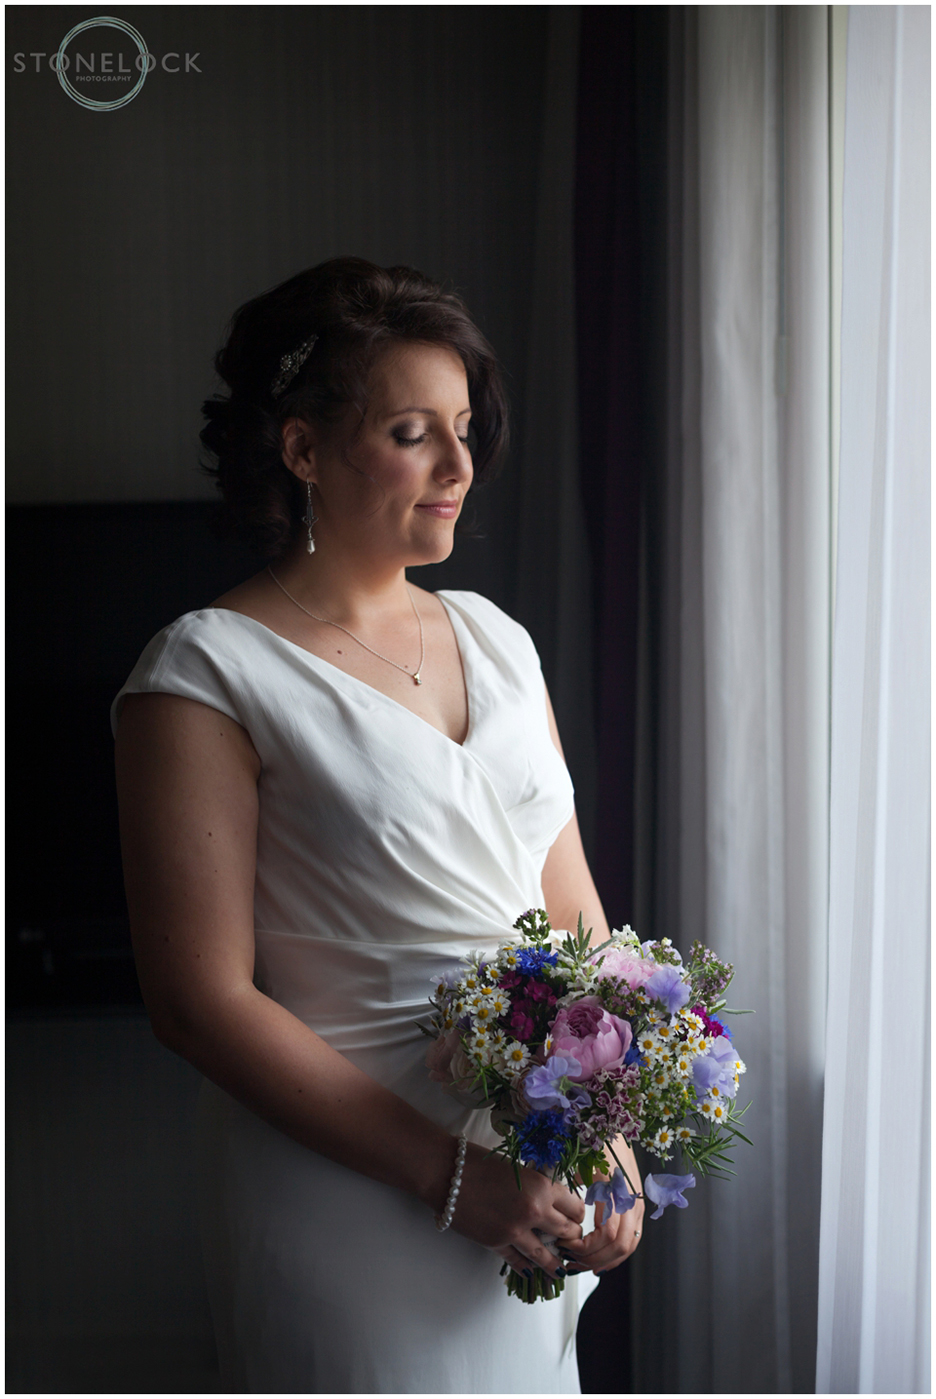 A gorgeous photo of a bride standing in from of a window